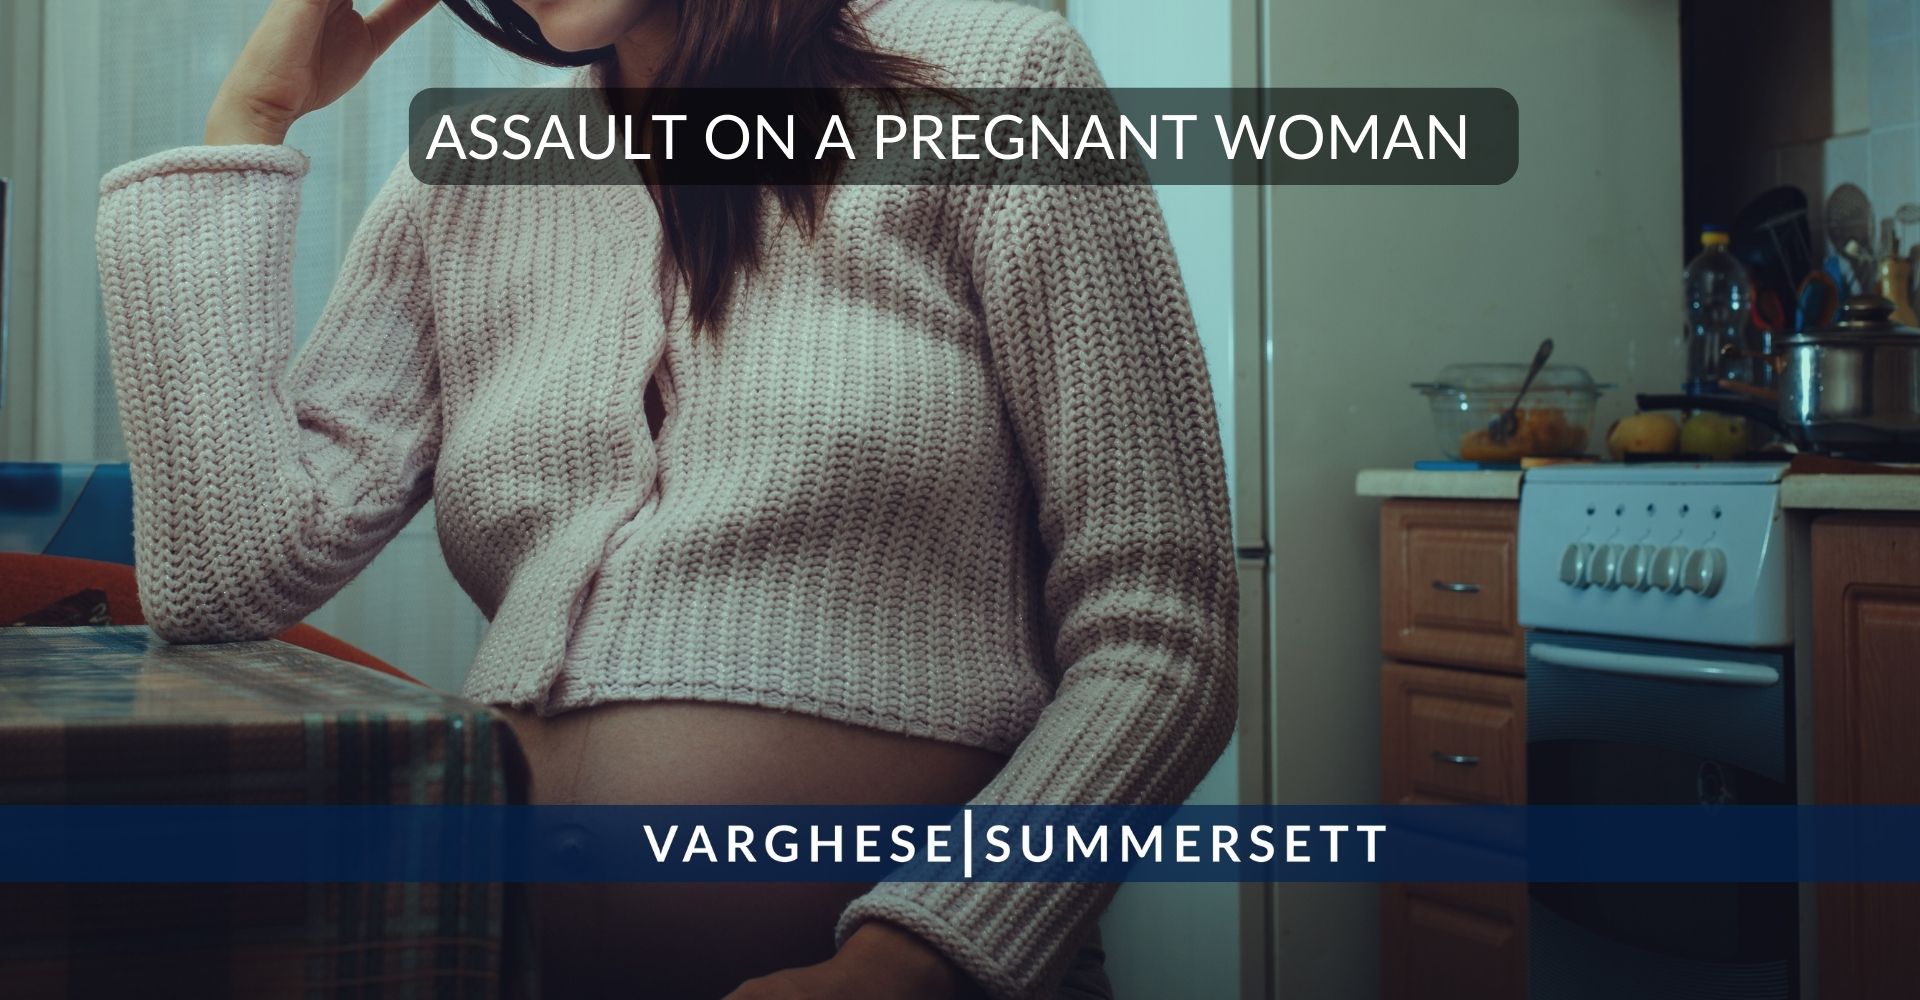 Assault on a Pregnant Woman in Texas | Pregnant Person Assault